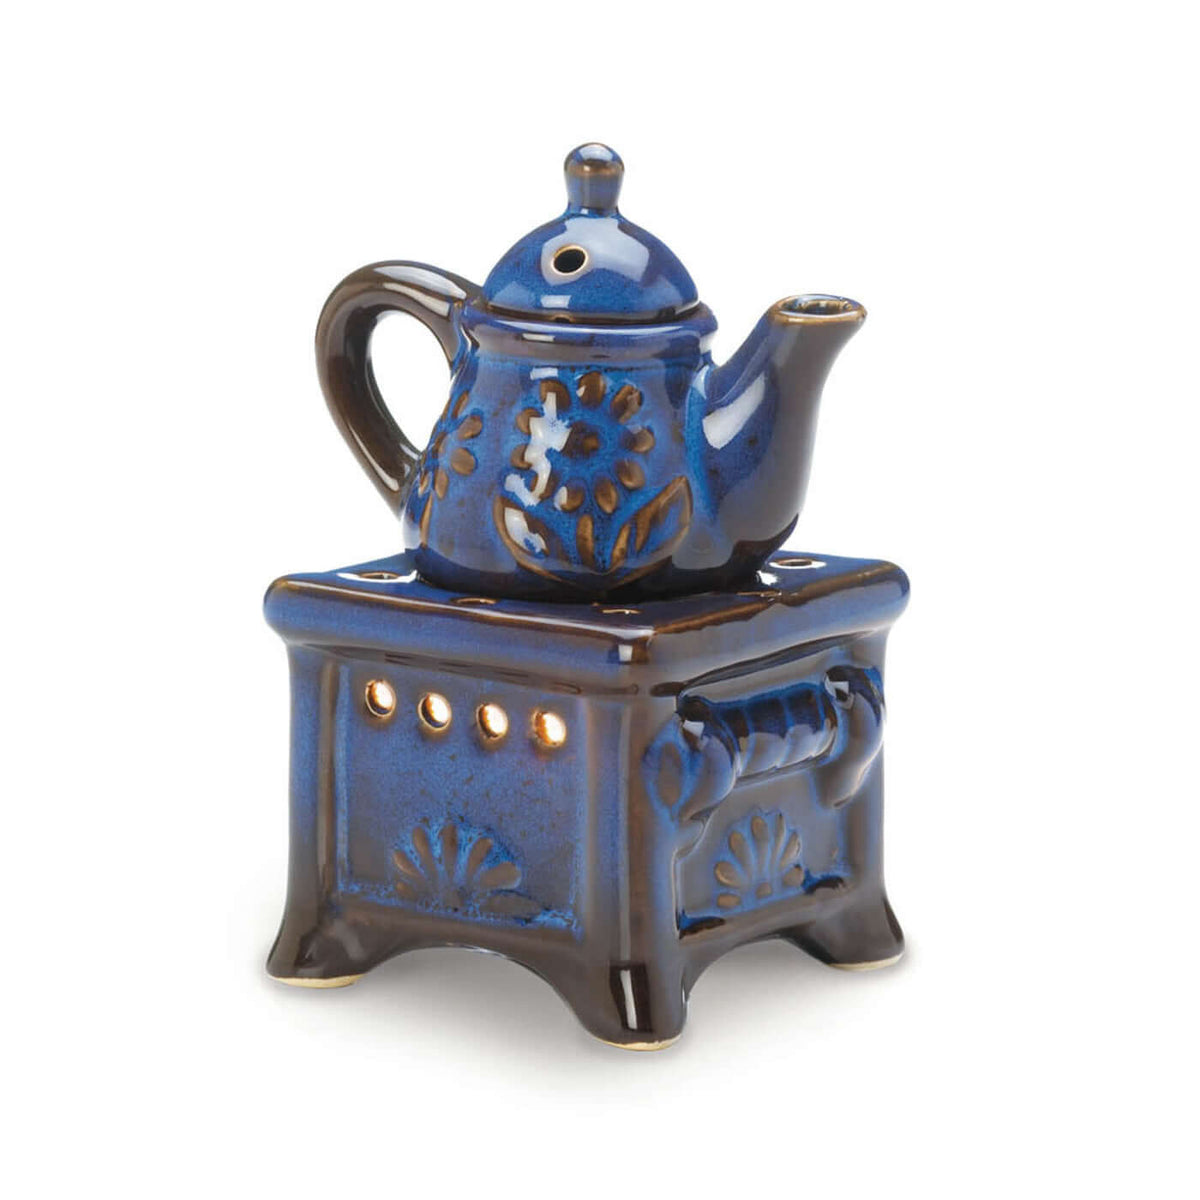  Blue Teapot Stove Oil Warmer - The House of Awareness